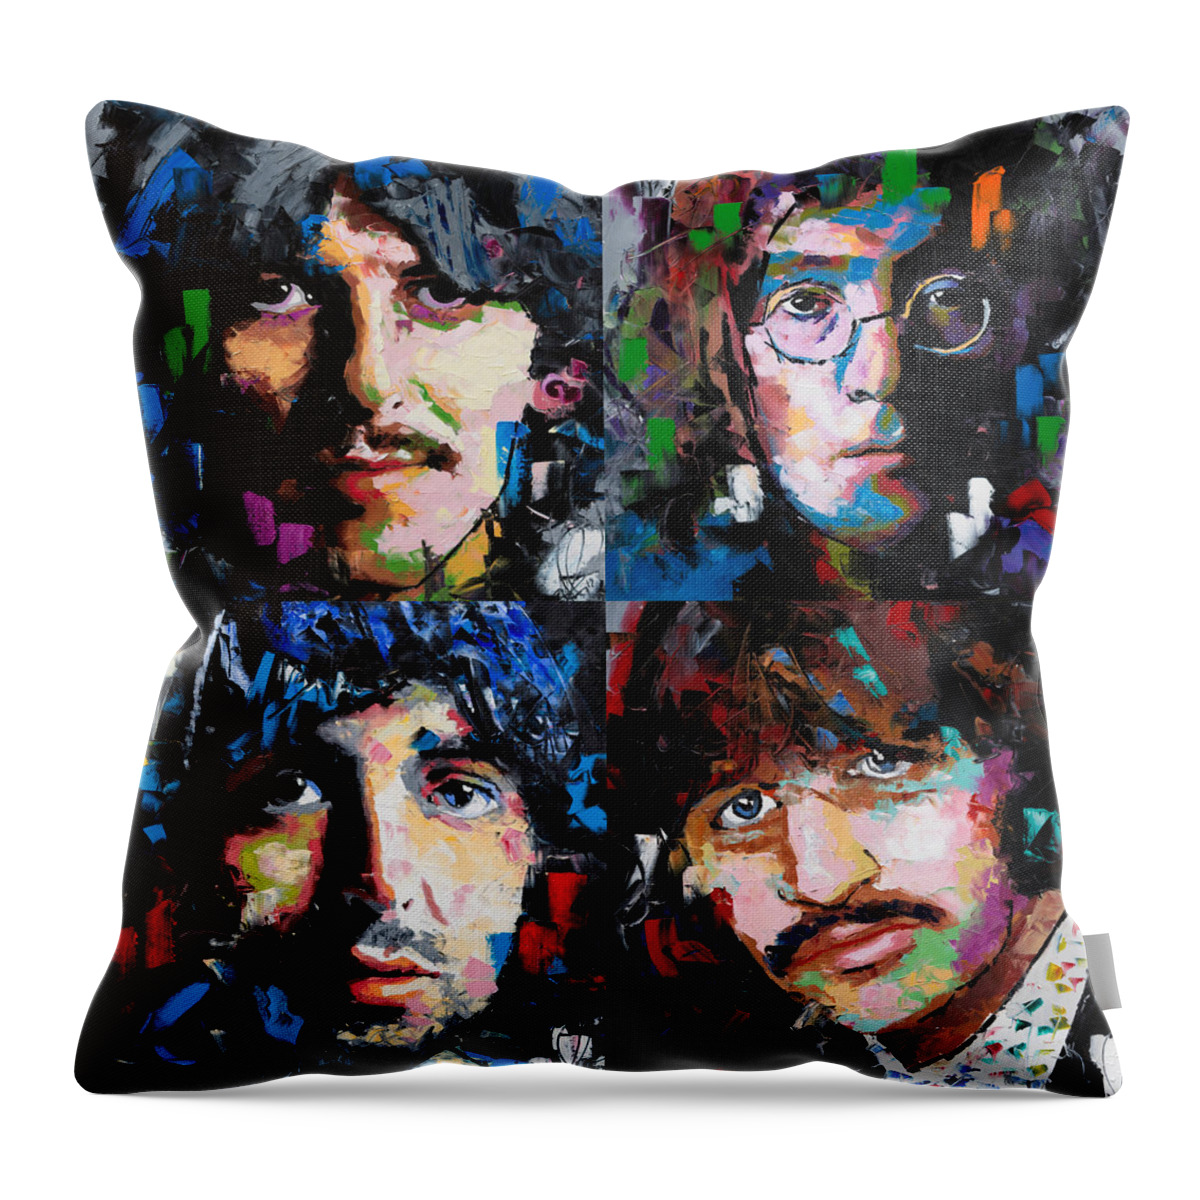 The Beatles Throw Pillow featuring the painting The Beatles by Richard Day